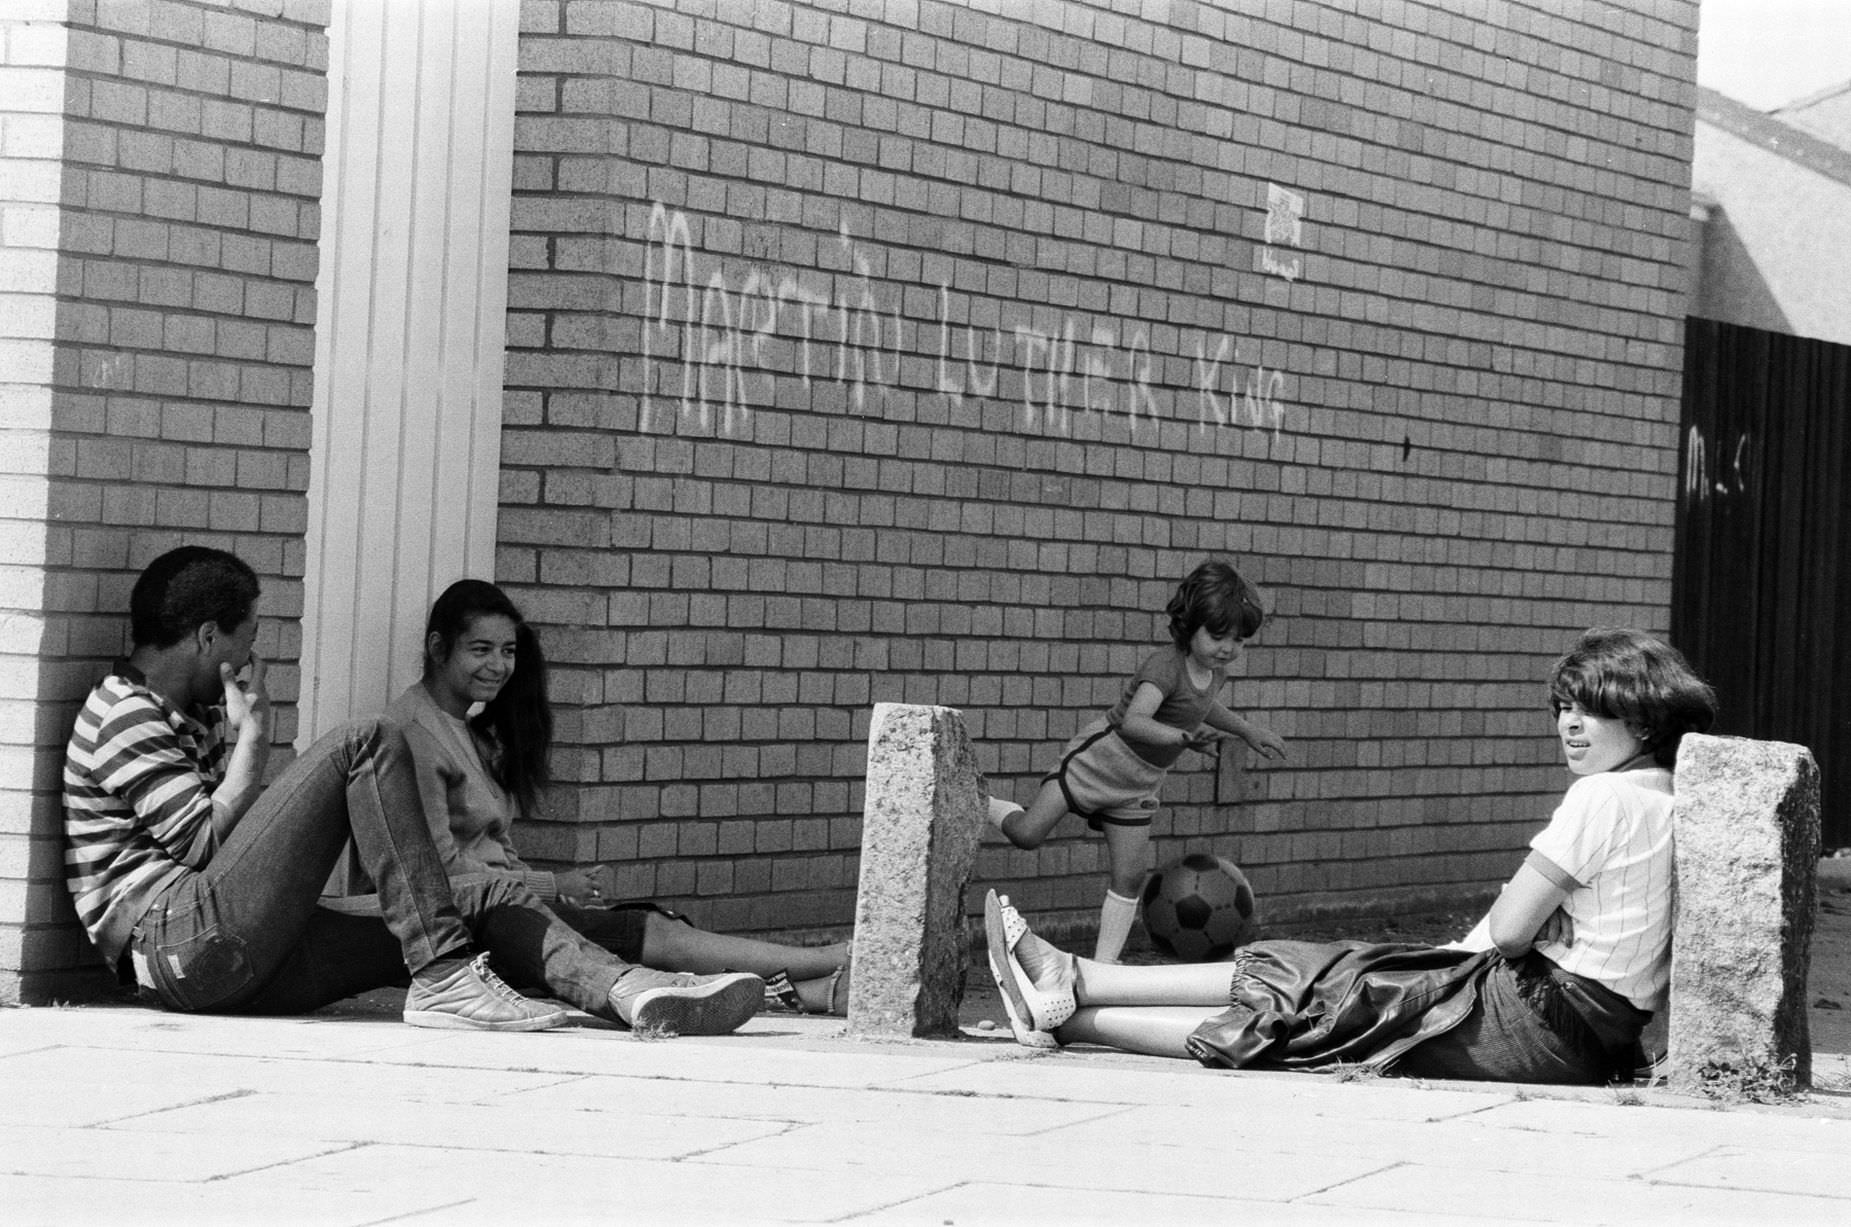 Life in Toxteth, Liverpool. These pictures taken a few days after the riots, 9th July 1981